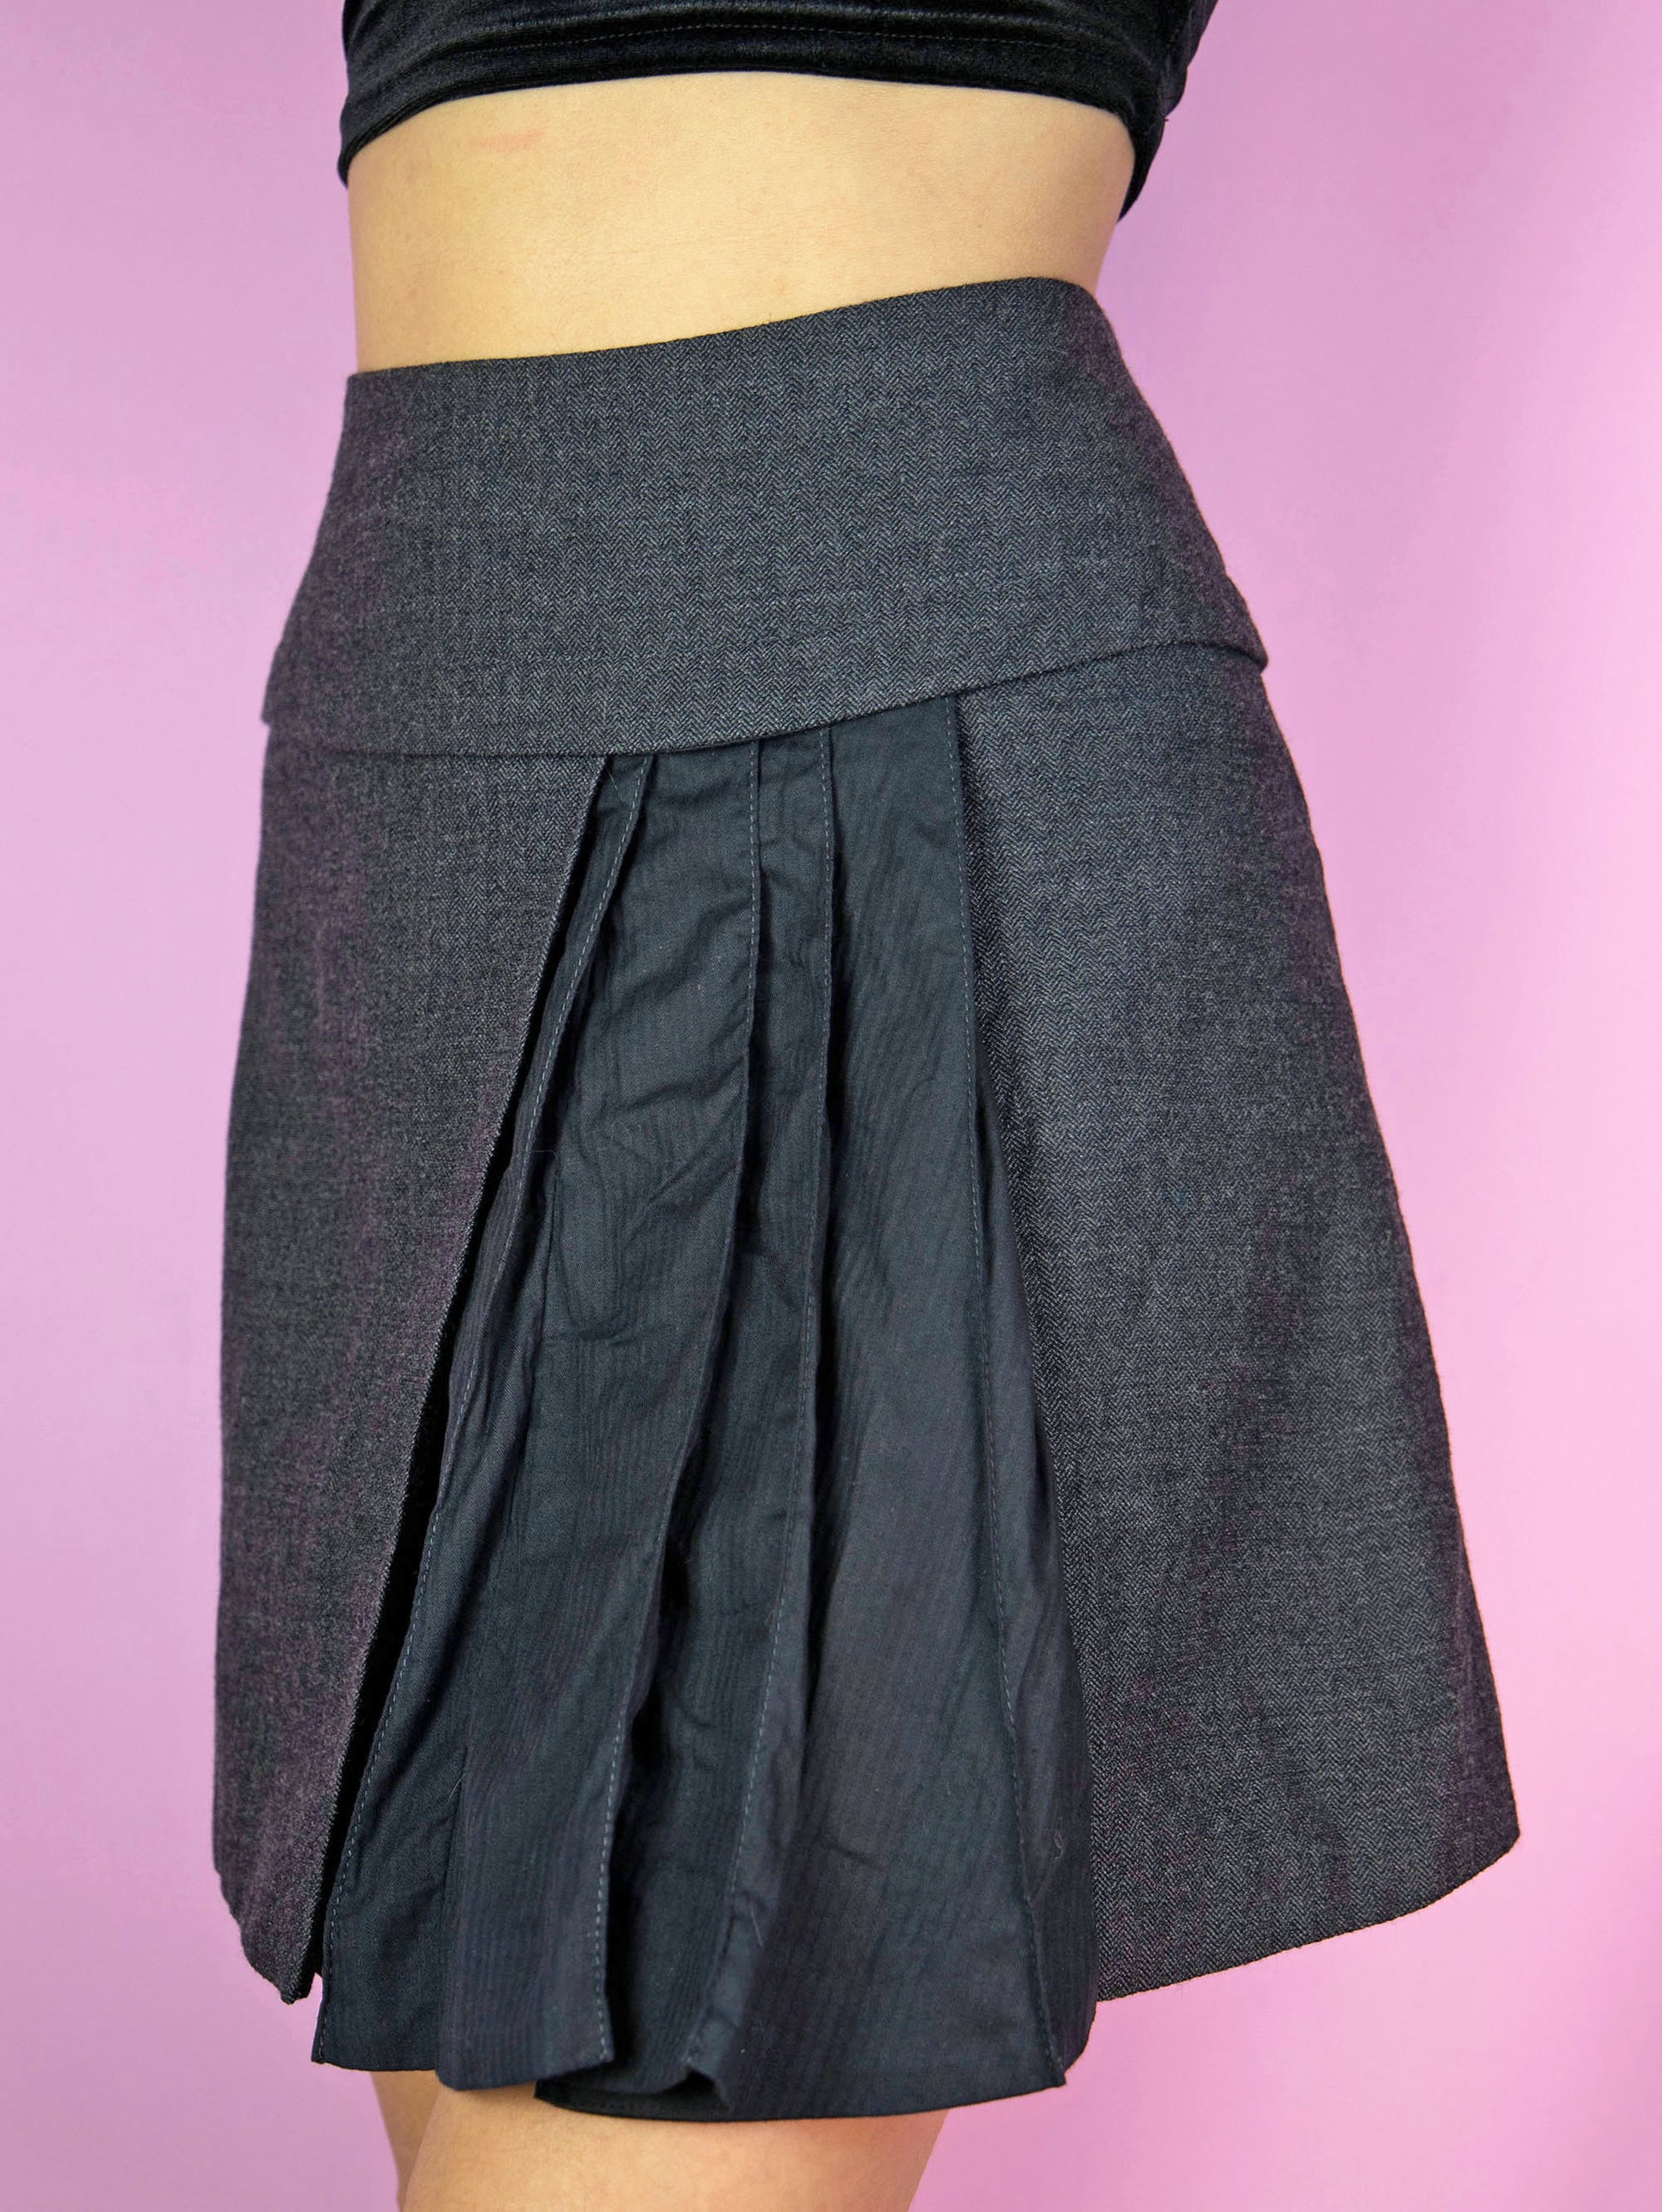 The Vintage Y2K Gray Asymmetric Mini Skirt is a vintage gray wool blend skirt with black pleated detailing and a back zipper closure. Fairy grunge 2000s subversive knit mini skirt.